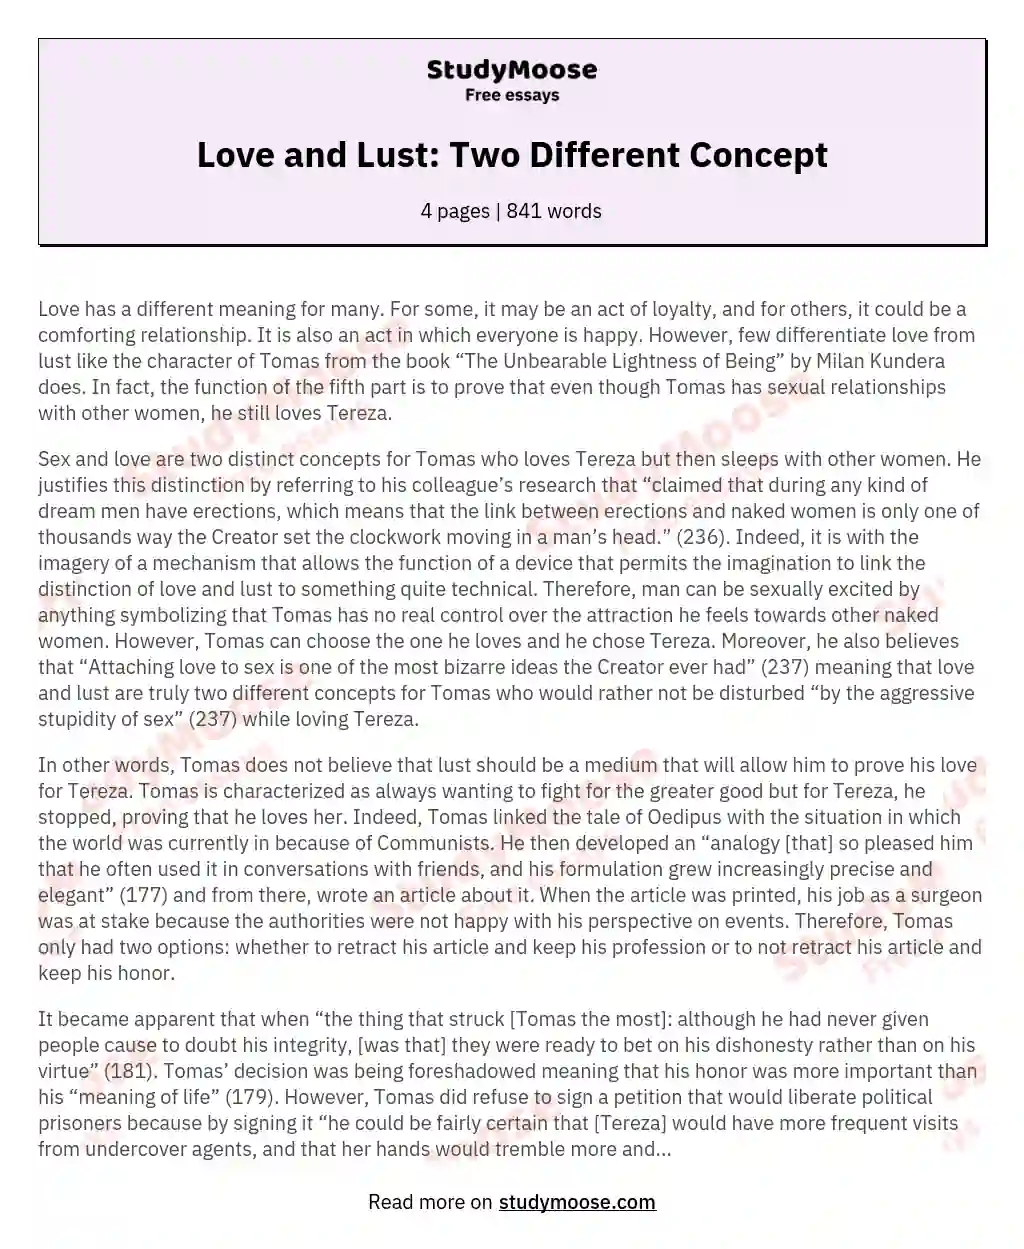 Love and Lust: Two Different Concept